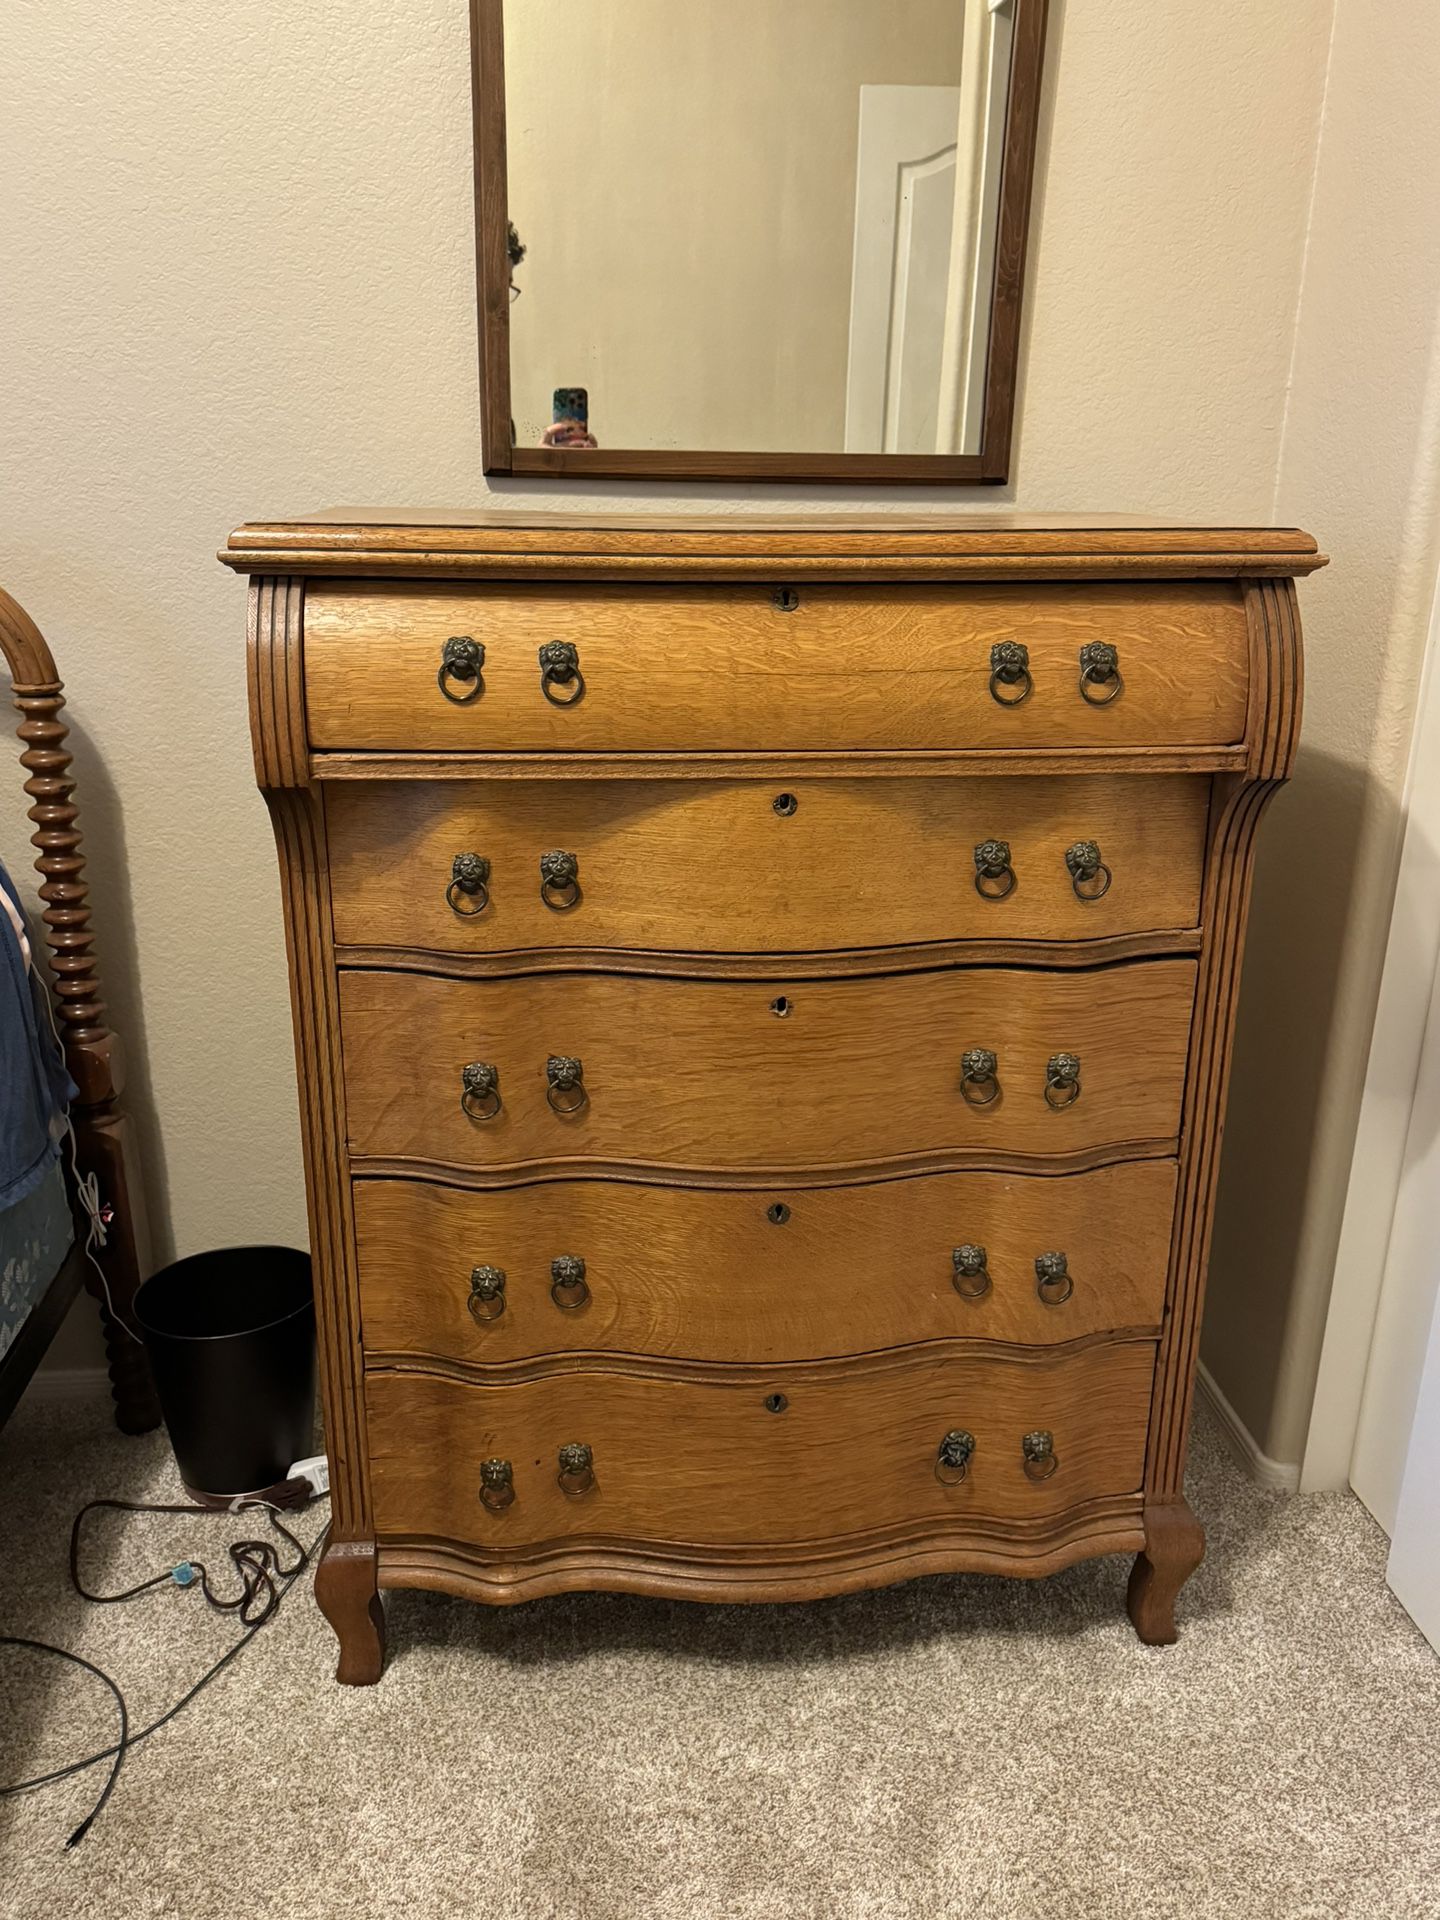 Beautiful Curved Front Antique Dresser!!!